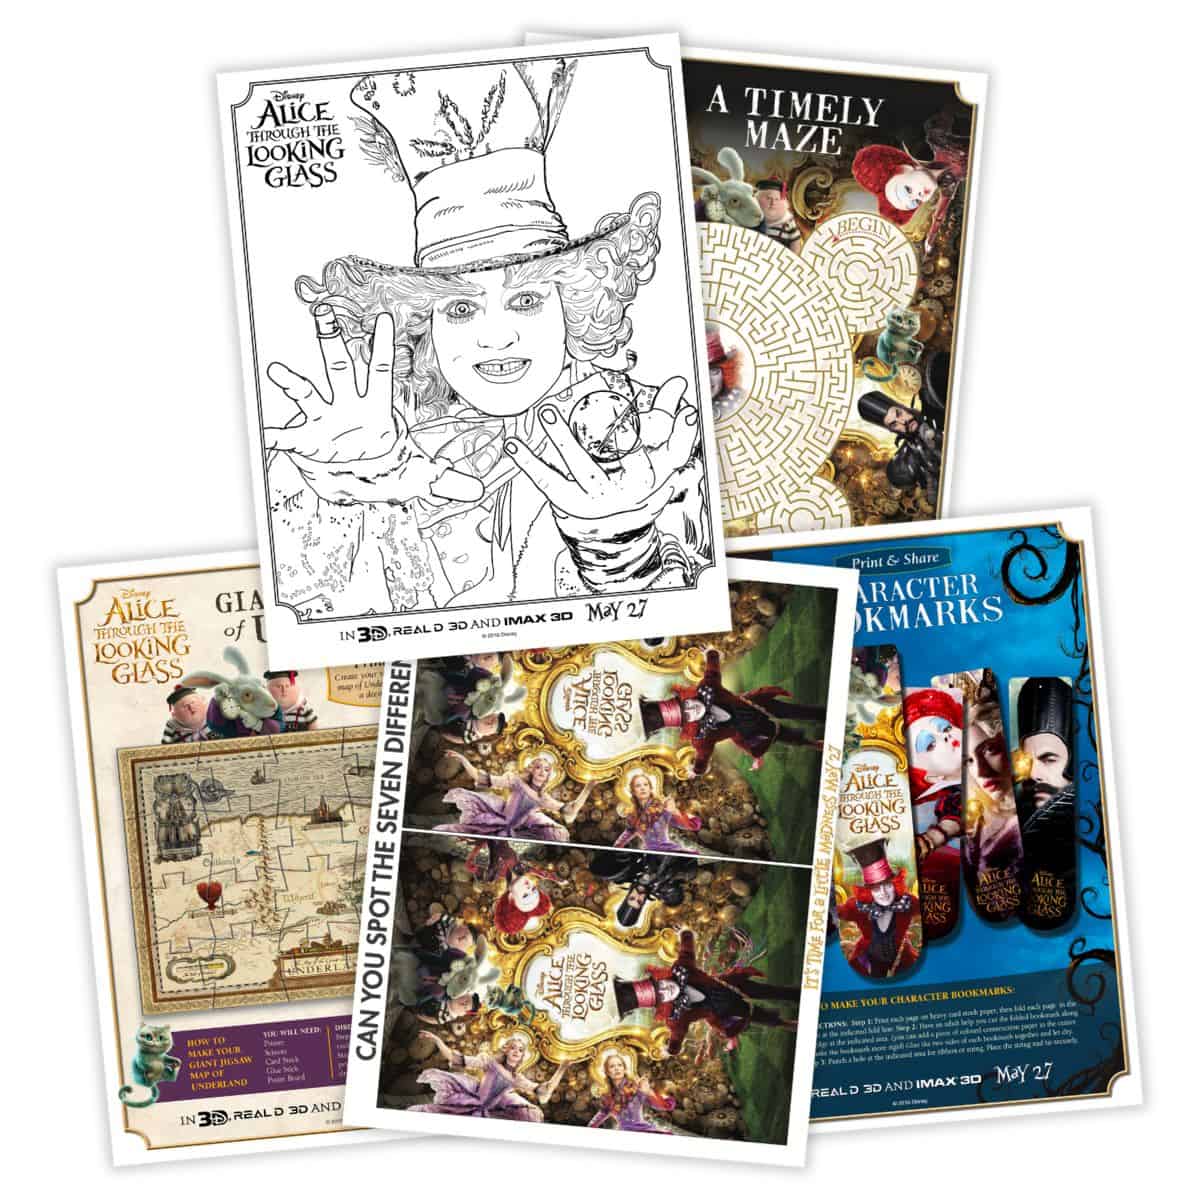 Disney Alice Through the Looking Glass Printable Activity Sheets	

			
		
	

		
			Free – Buy Now Checkout
							
					
						
							
						
						Added to cart